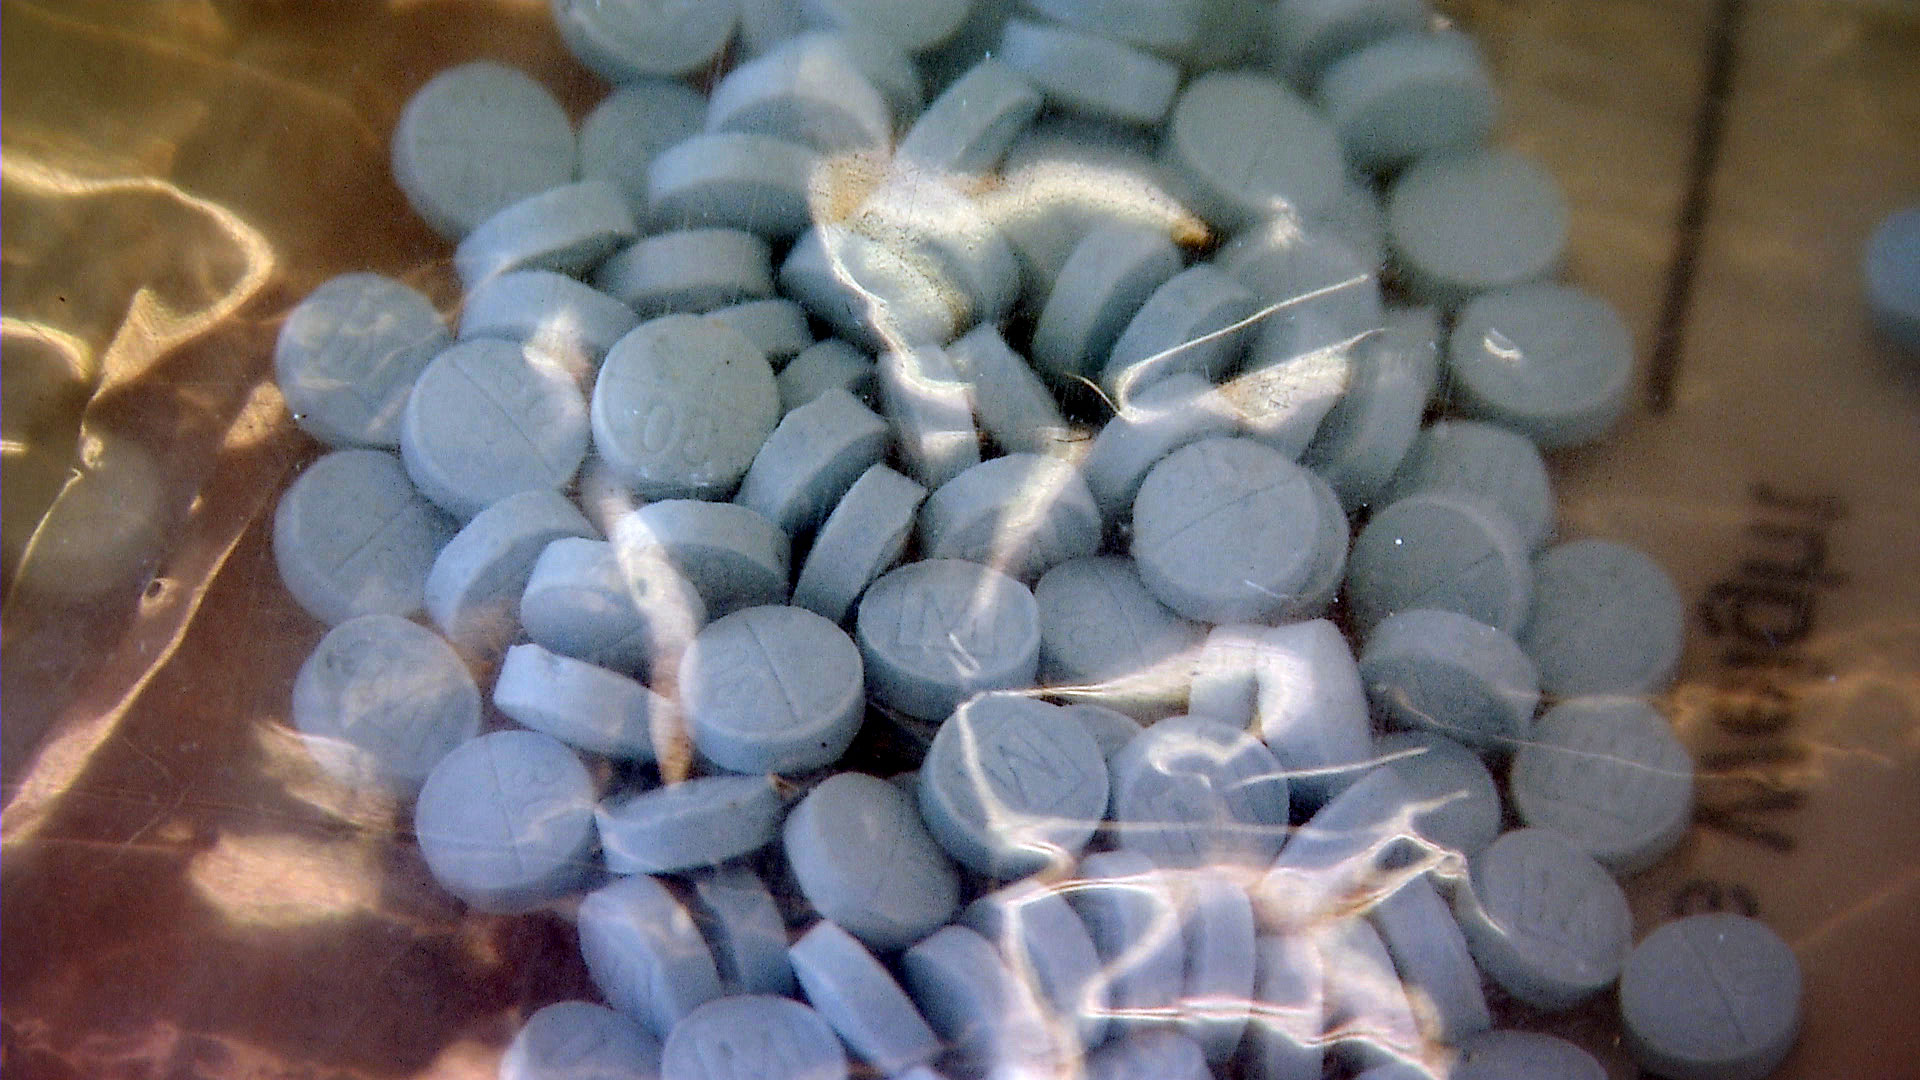 Fentanyl pills seized by the Pima County Sheriff's Department. March 2019. 